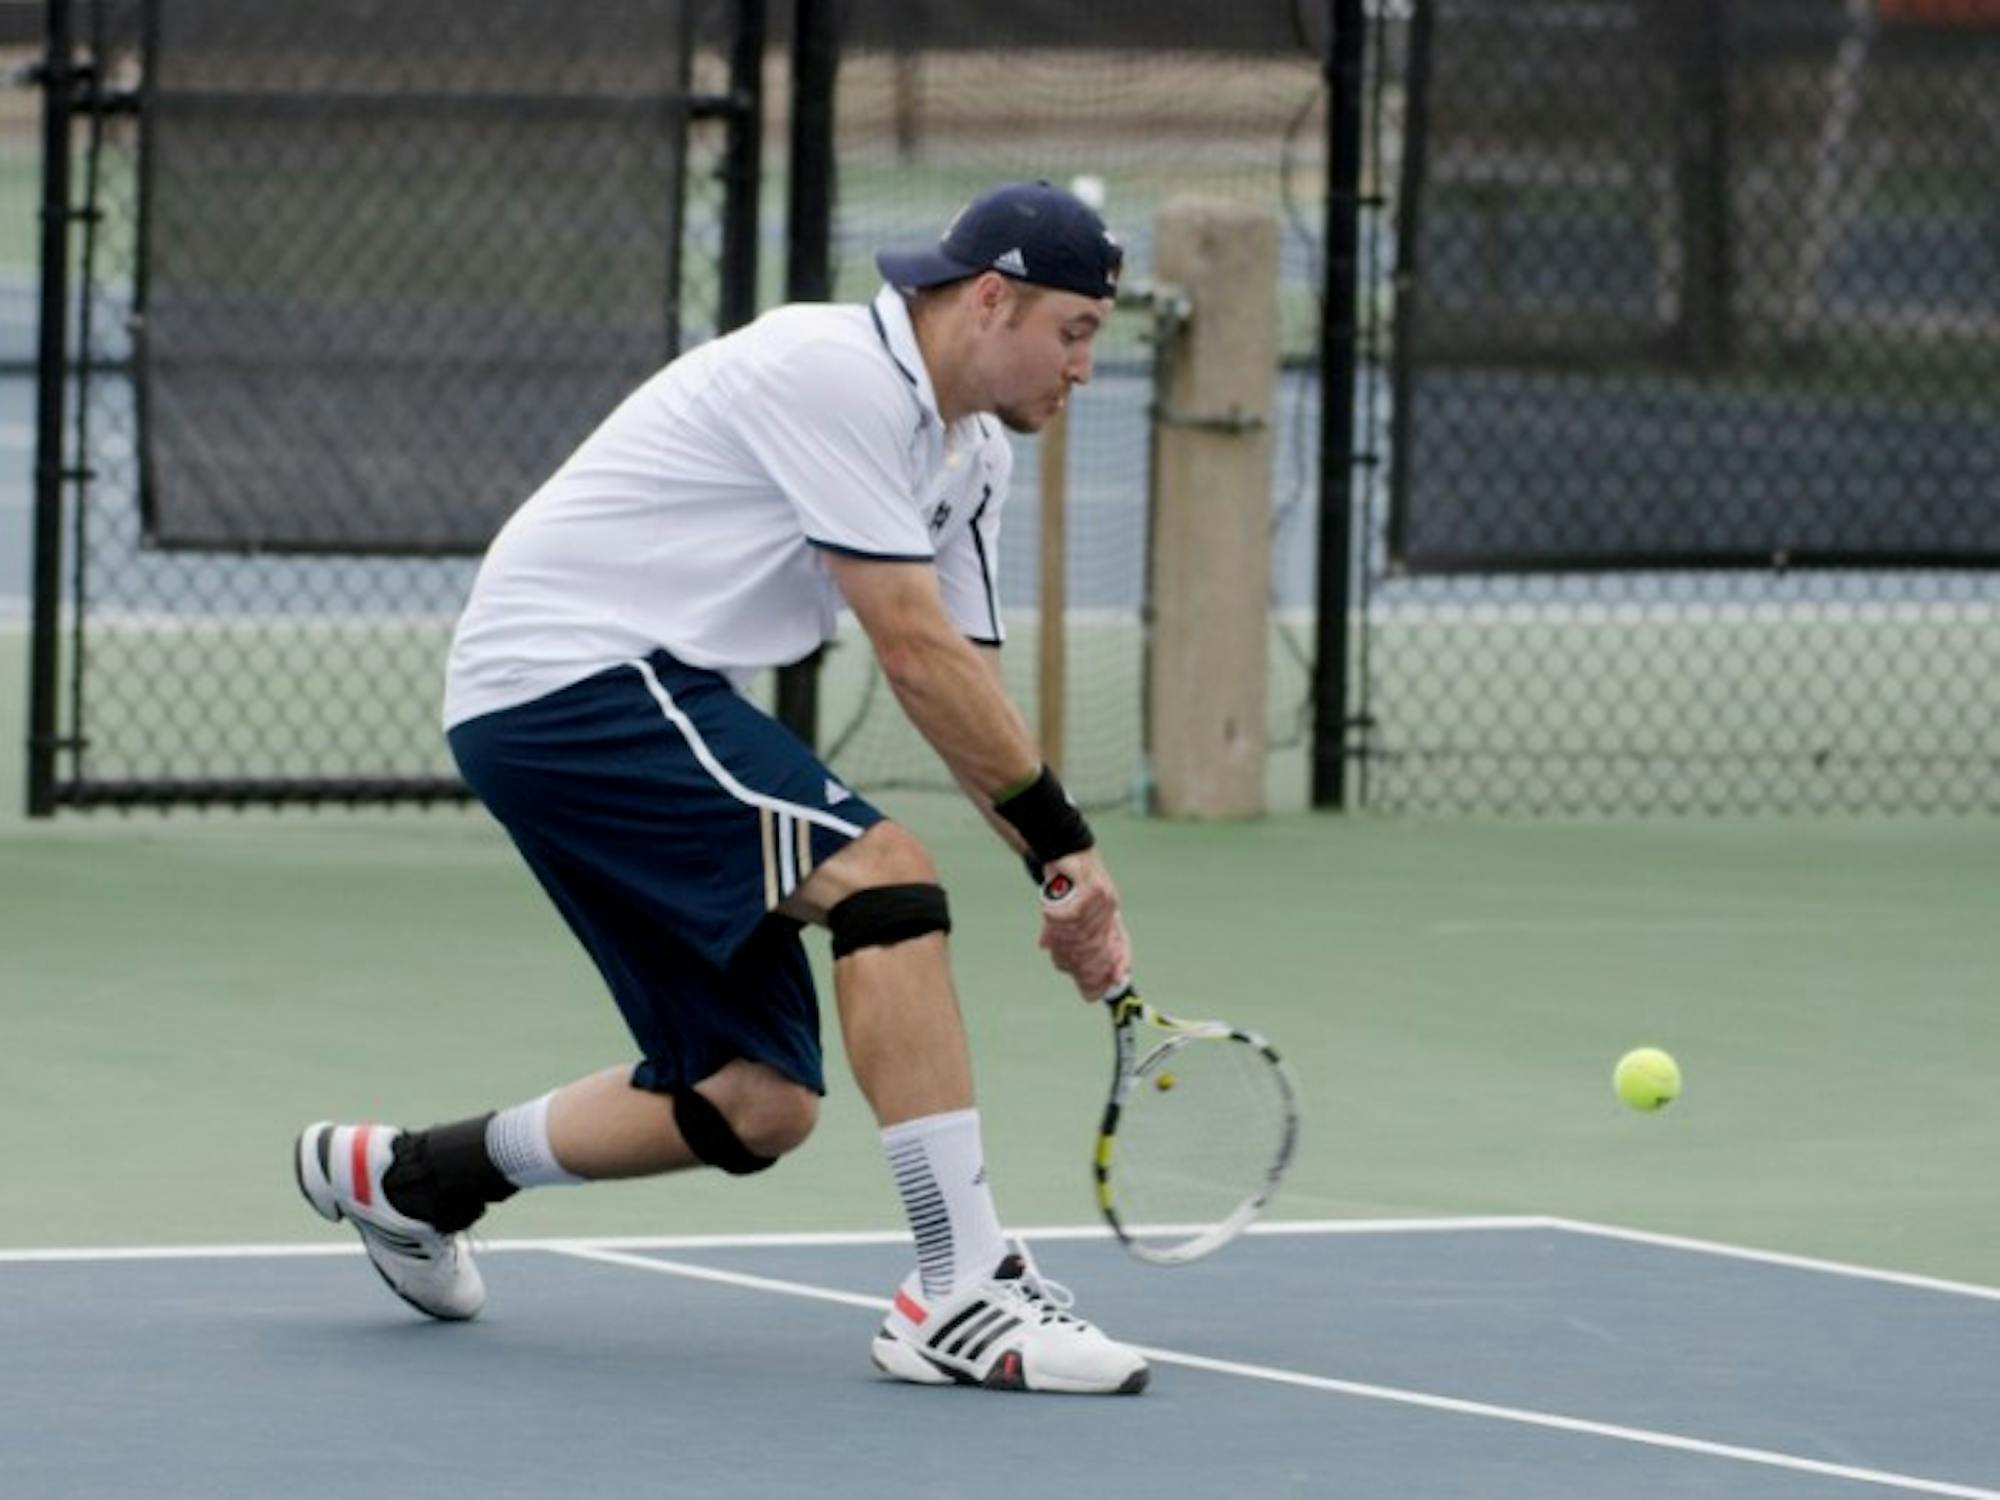 Senior Billy Pecor returns a hit during Notre Dame’s match against Florida State on April 13 at Eck Tennis Pavilion. The Irish beat the Seminoles, 6-1, and Pecor won his doubles match, 8-5.